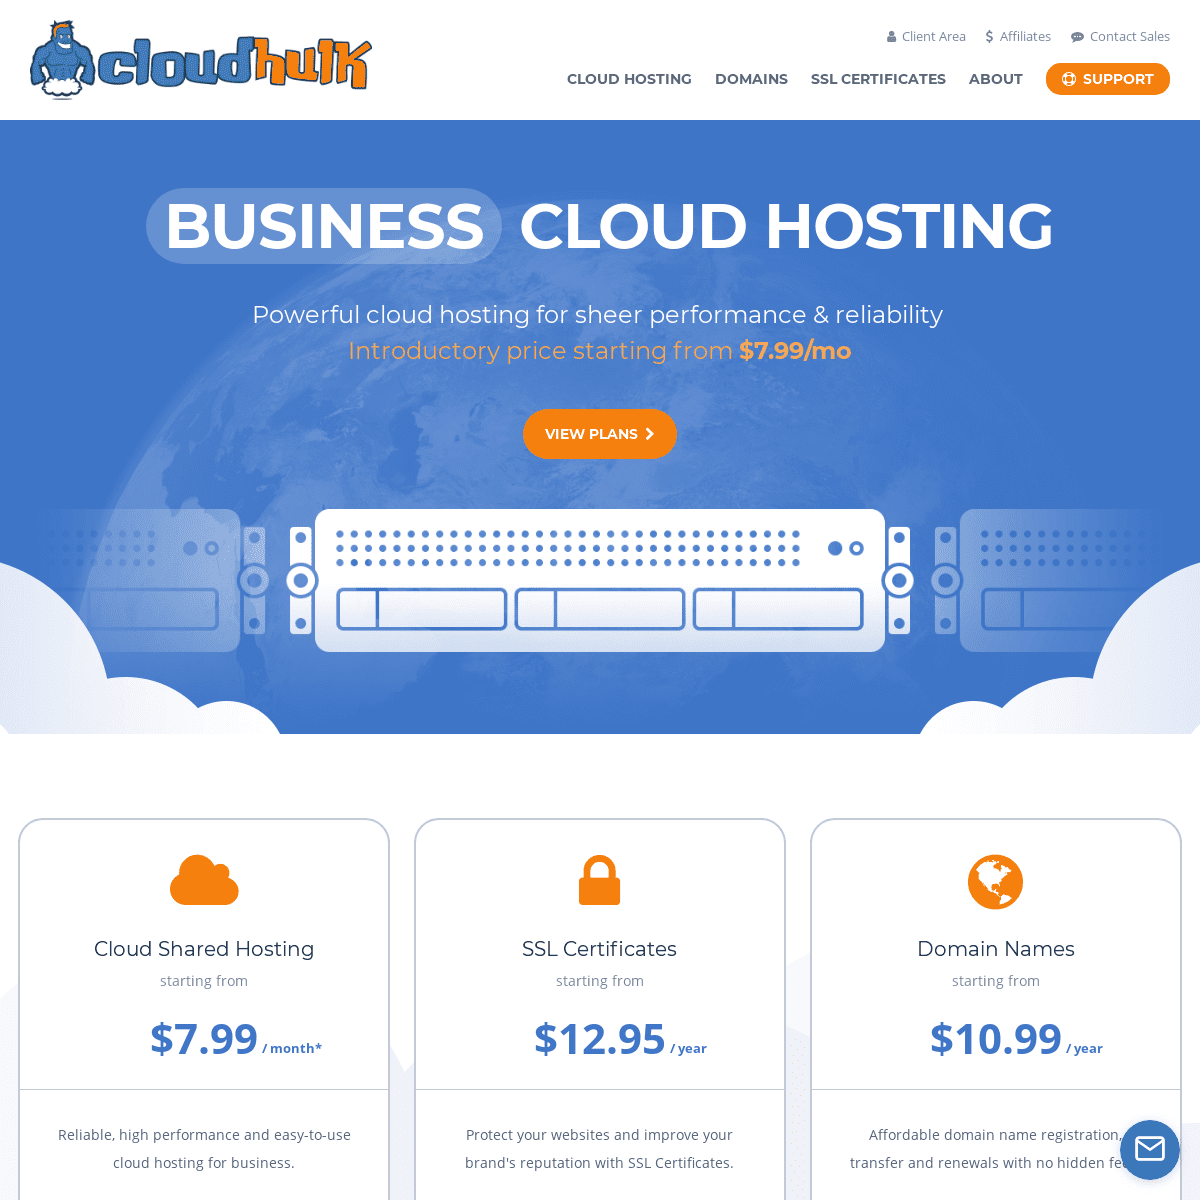 Business Cloud Hosting Solutions for Reliability & Performance - CloudHulk